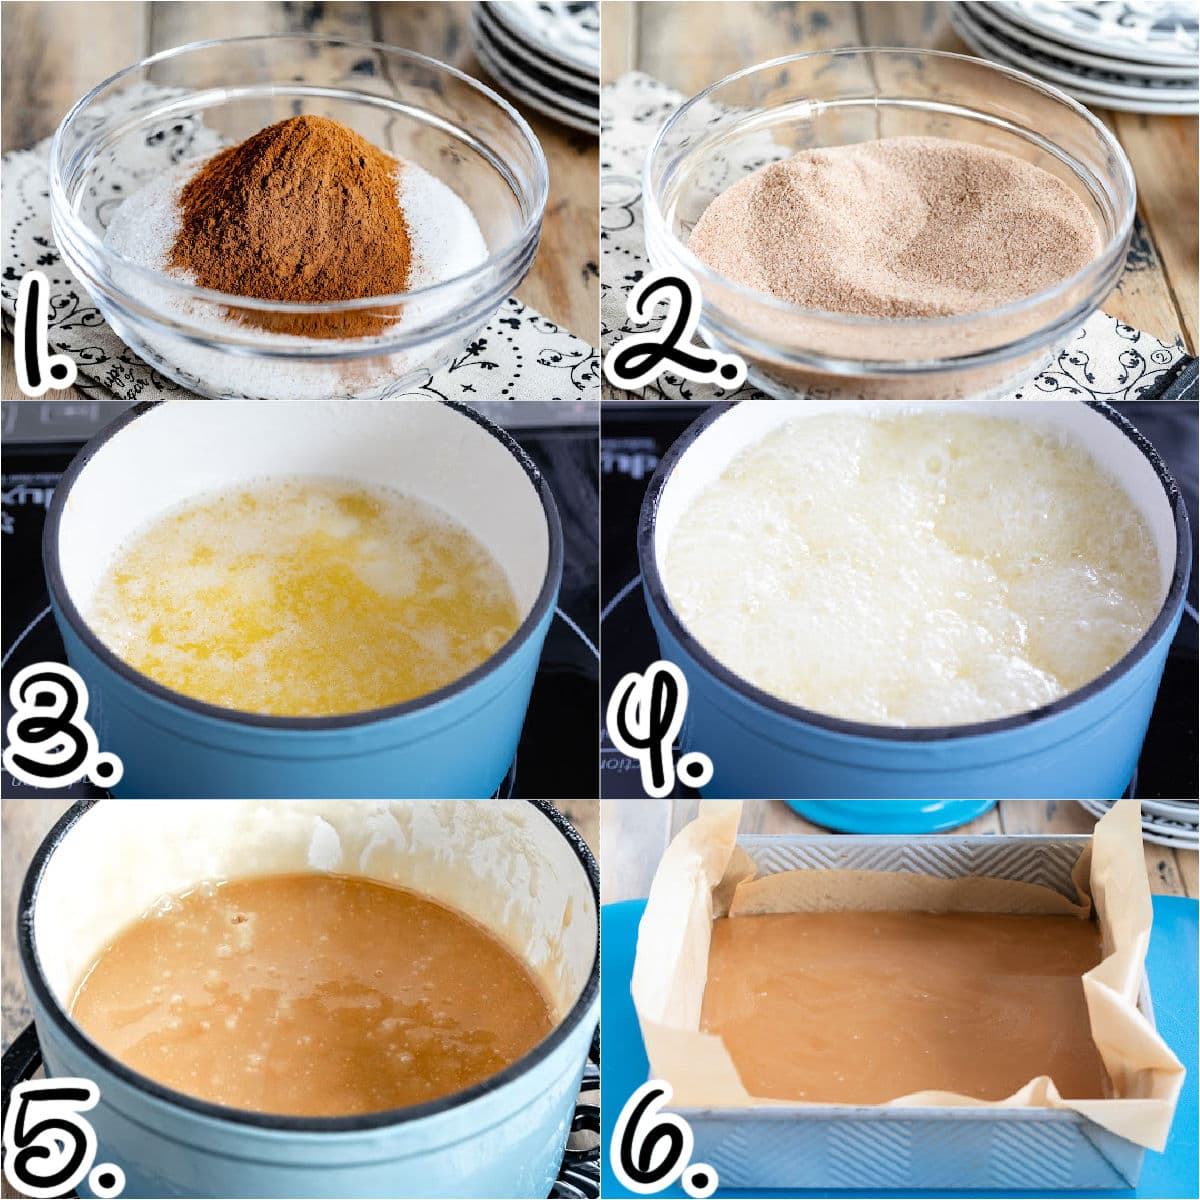 six image collage showing how to make cinnamon sugar and how to start making the toffee.